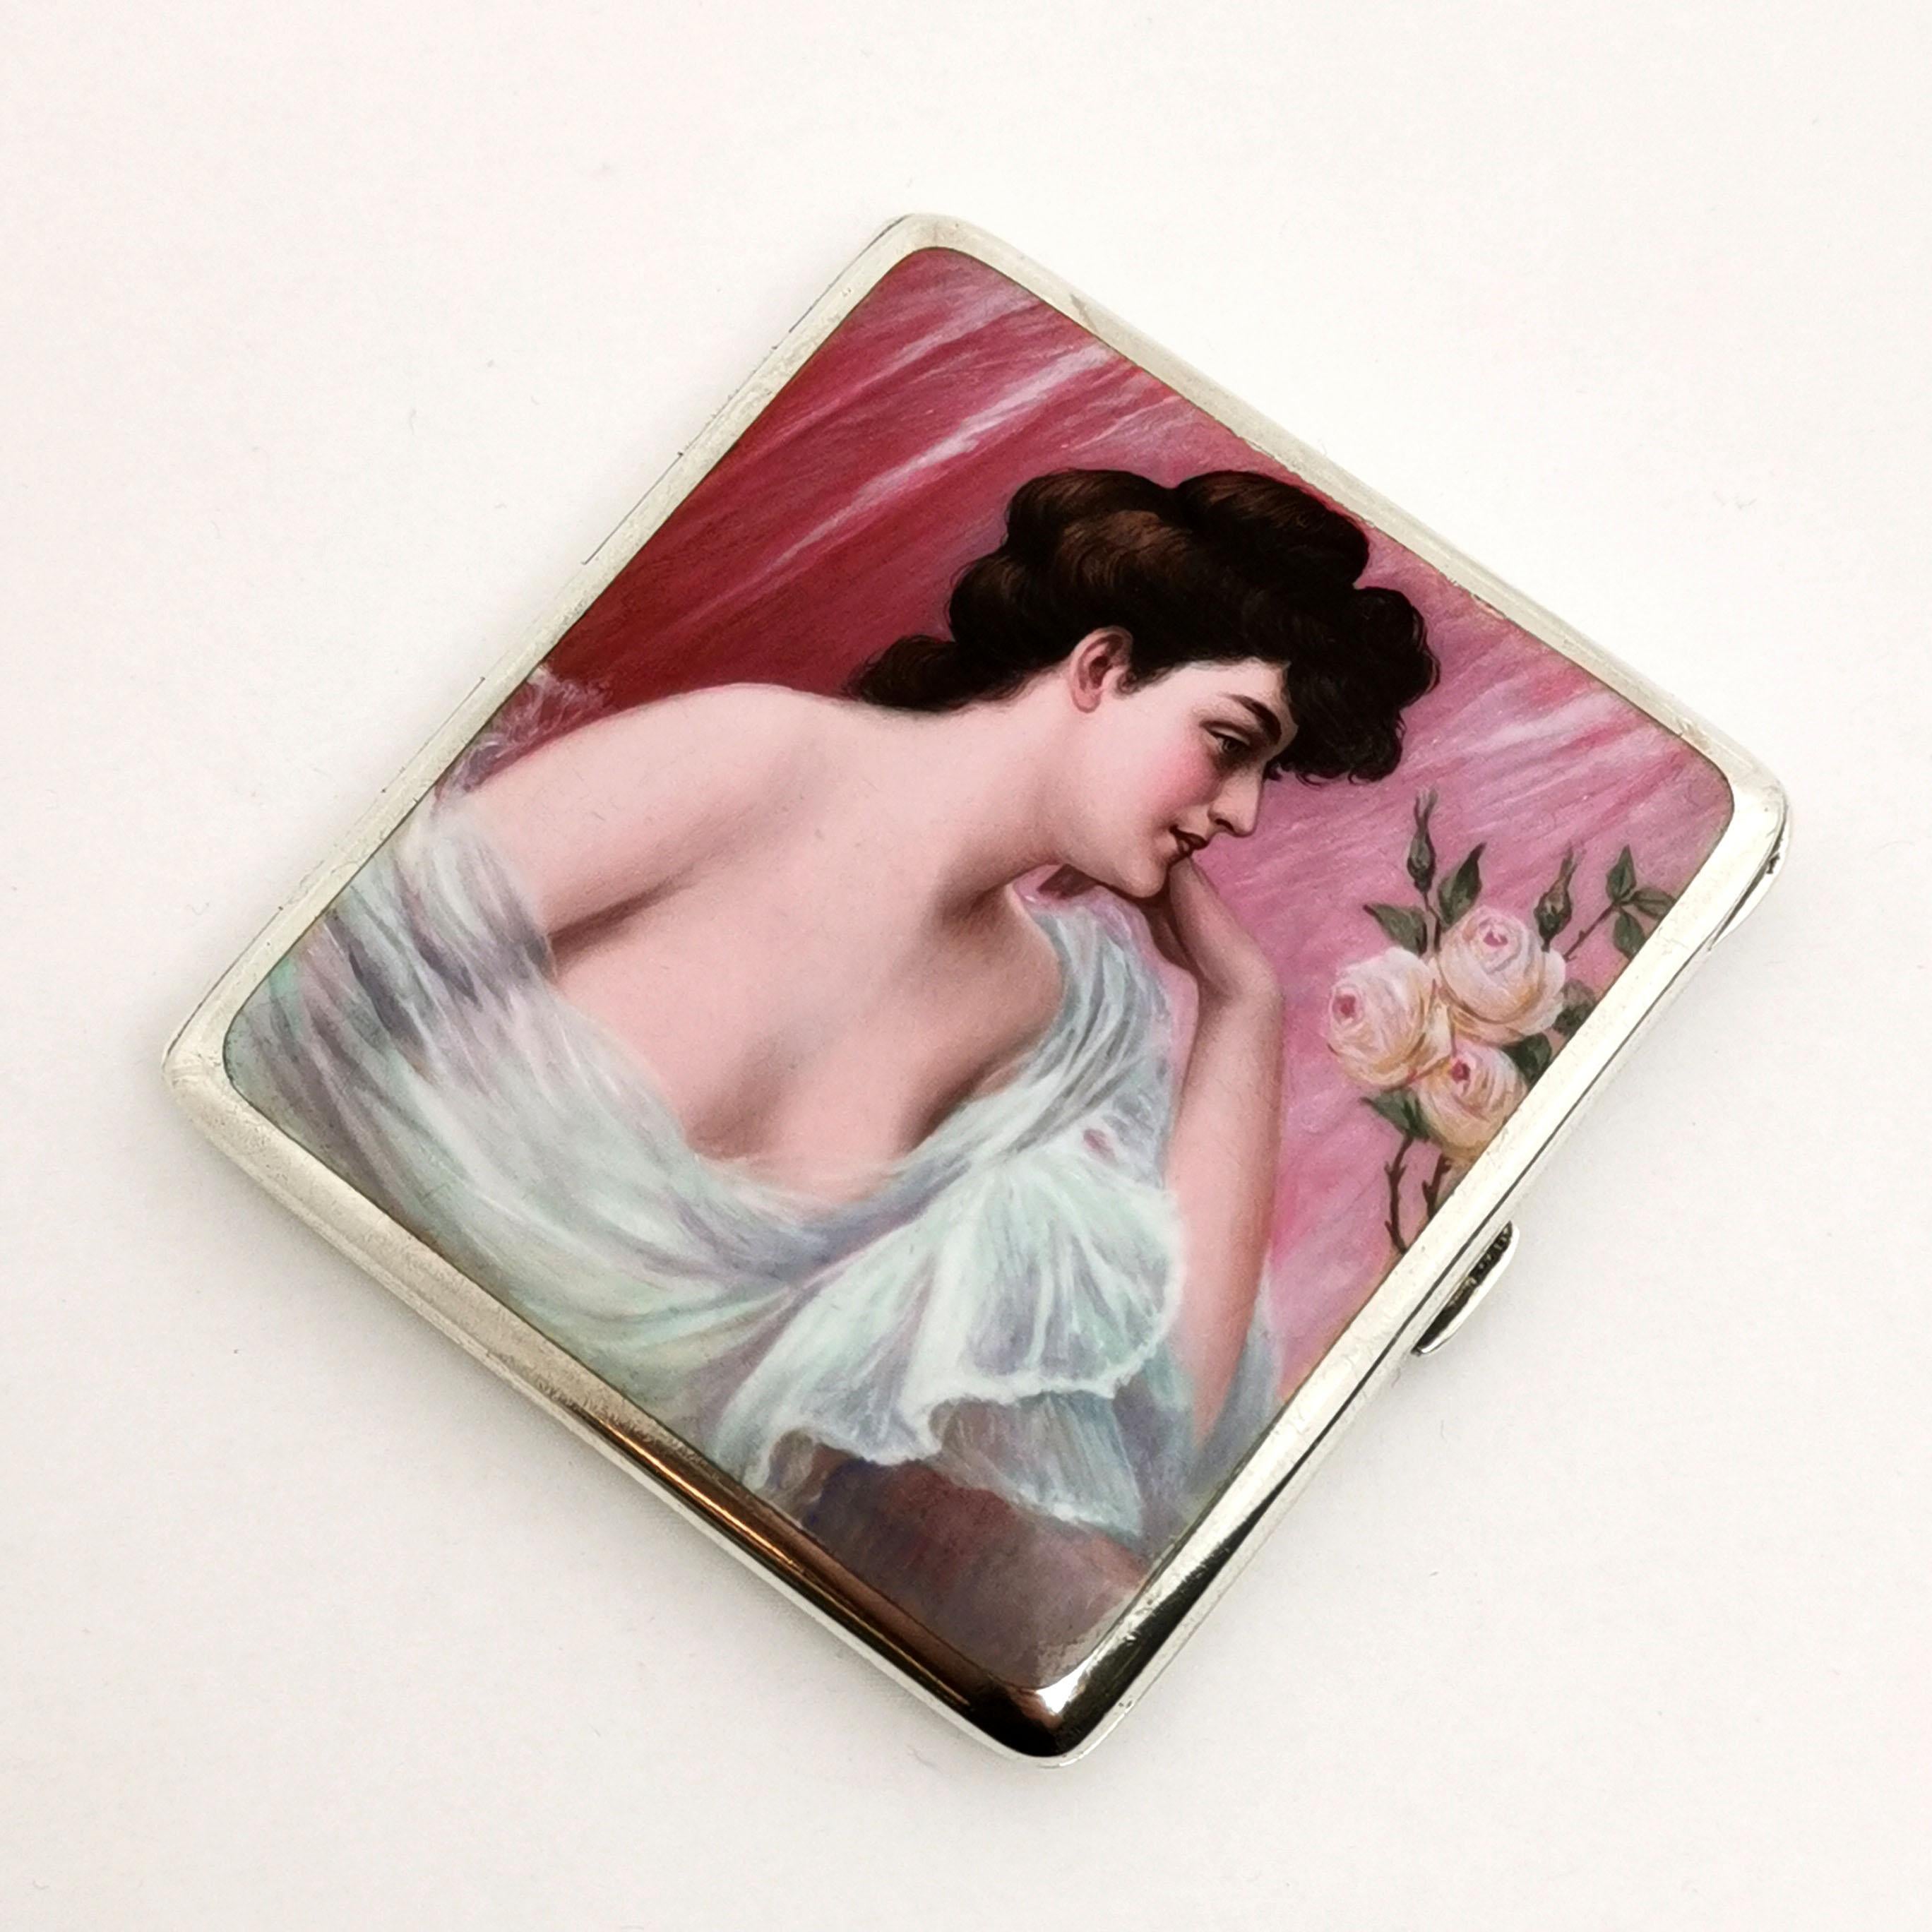 Antique German Solid Silver and Enamel Erotic Cigarette Case c. 1900 In Good Condition For Sale In London, GB